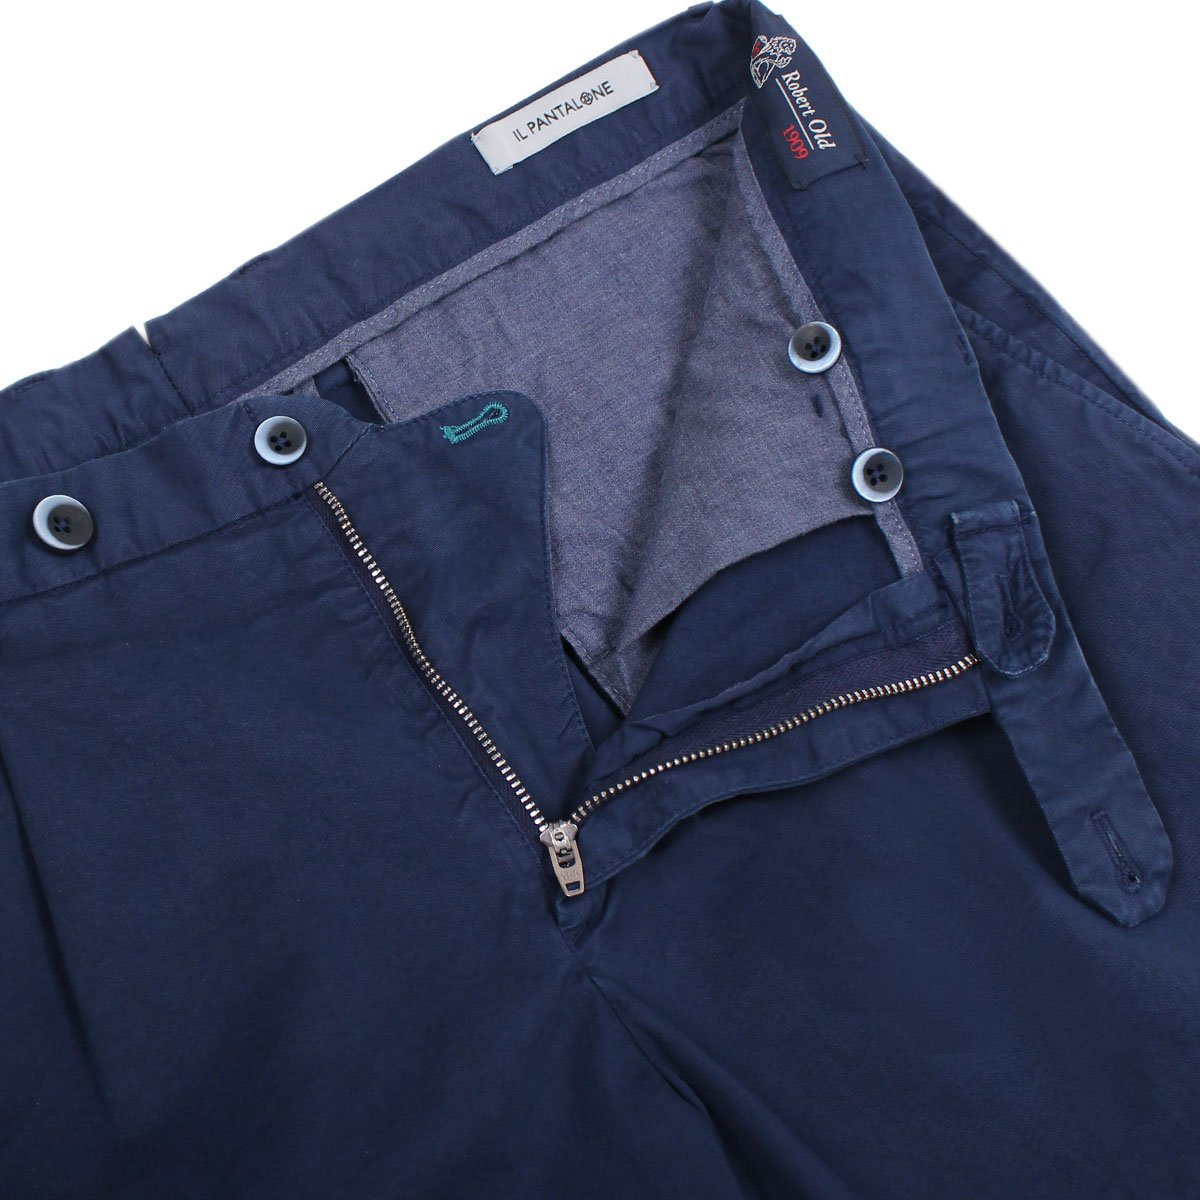 Classic Navy Cotton Stretch Chino Shorts  Robert Old   